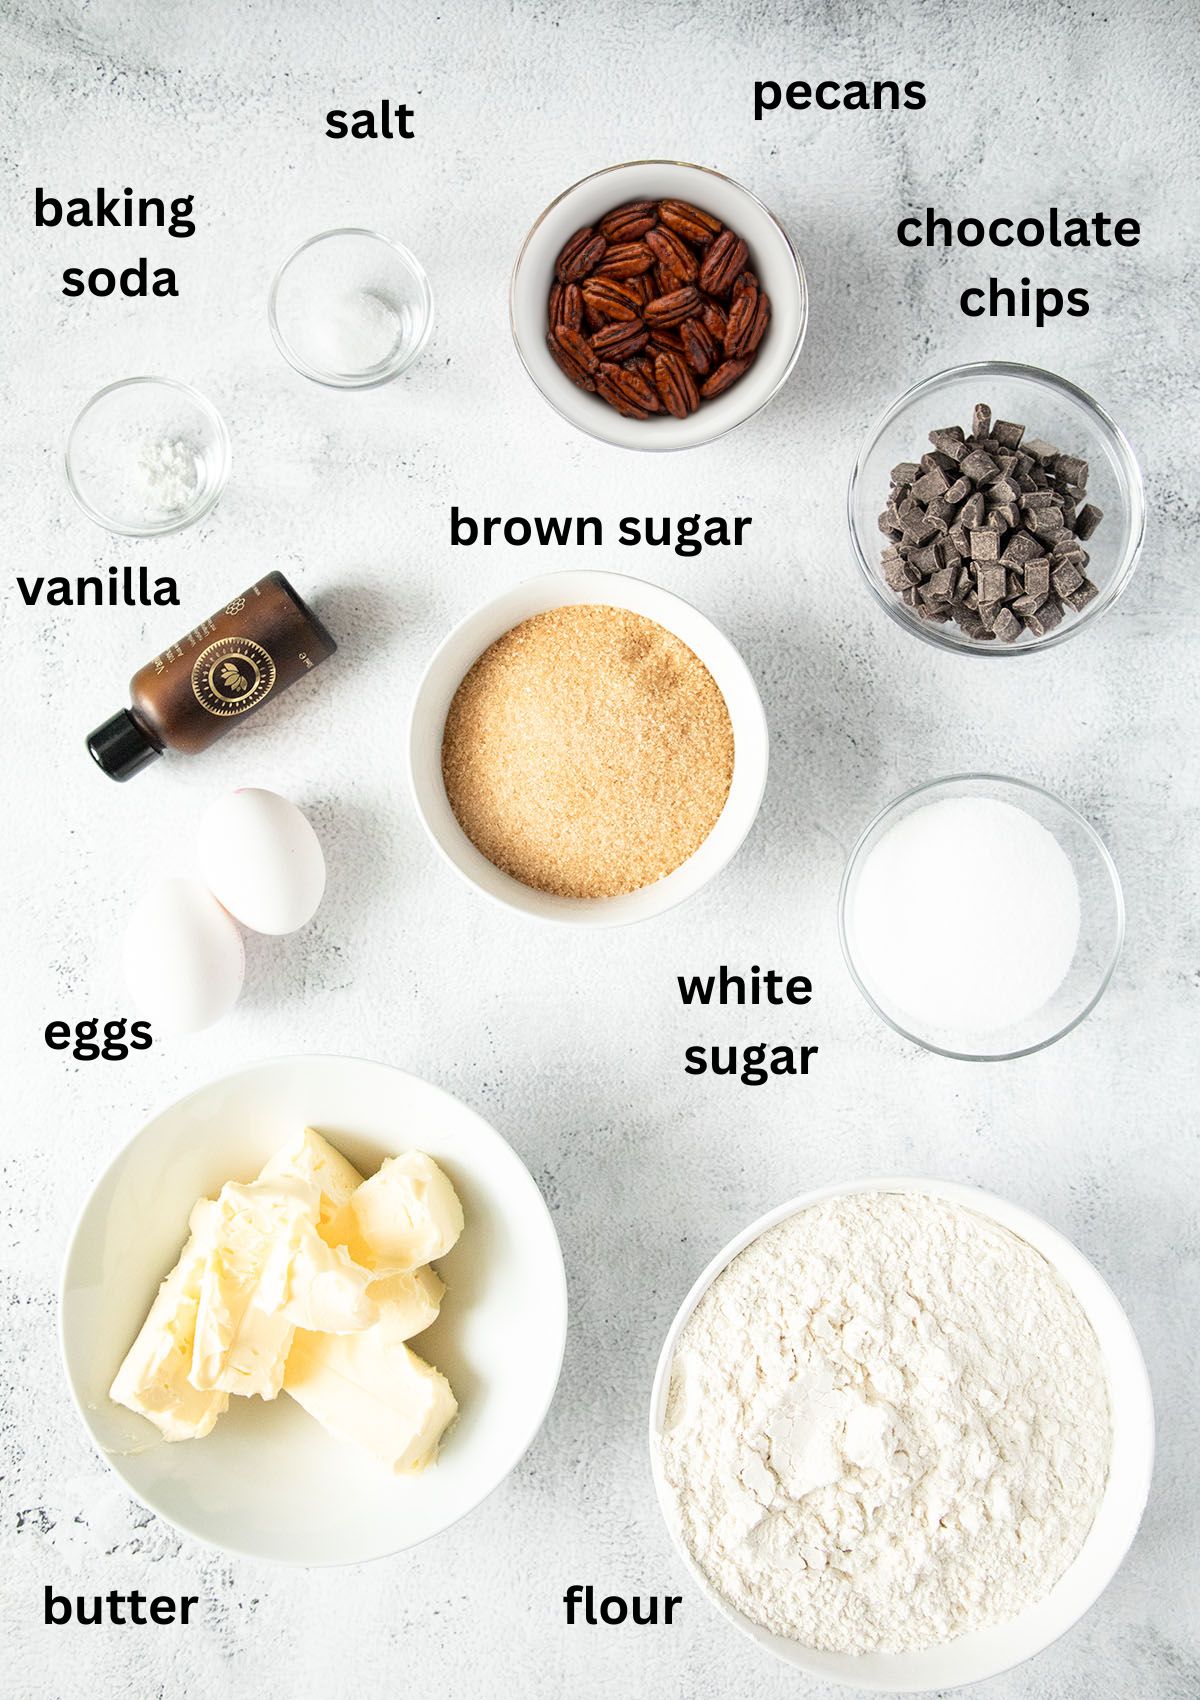 labeled ingredients for making cookies with chocolate chips and pecan nuts.